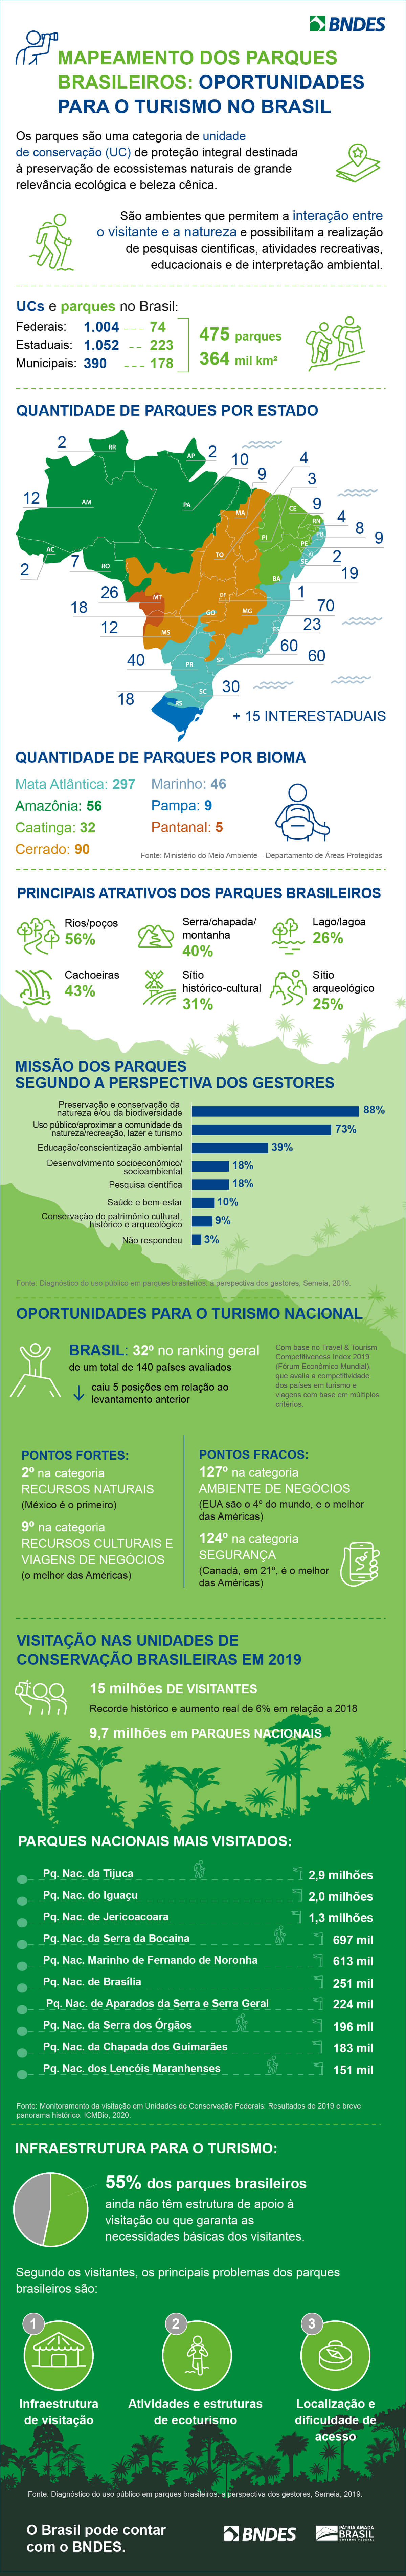 BNDES_Infografico_Parques_BR_final_red